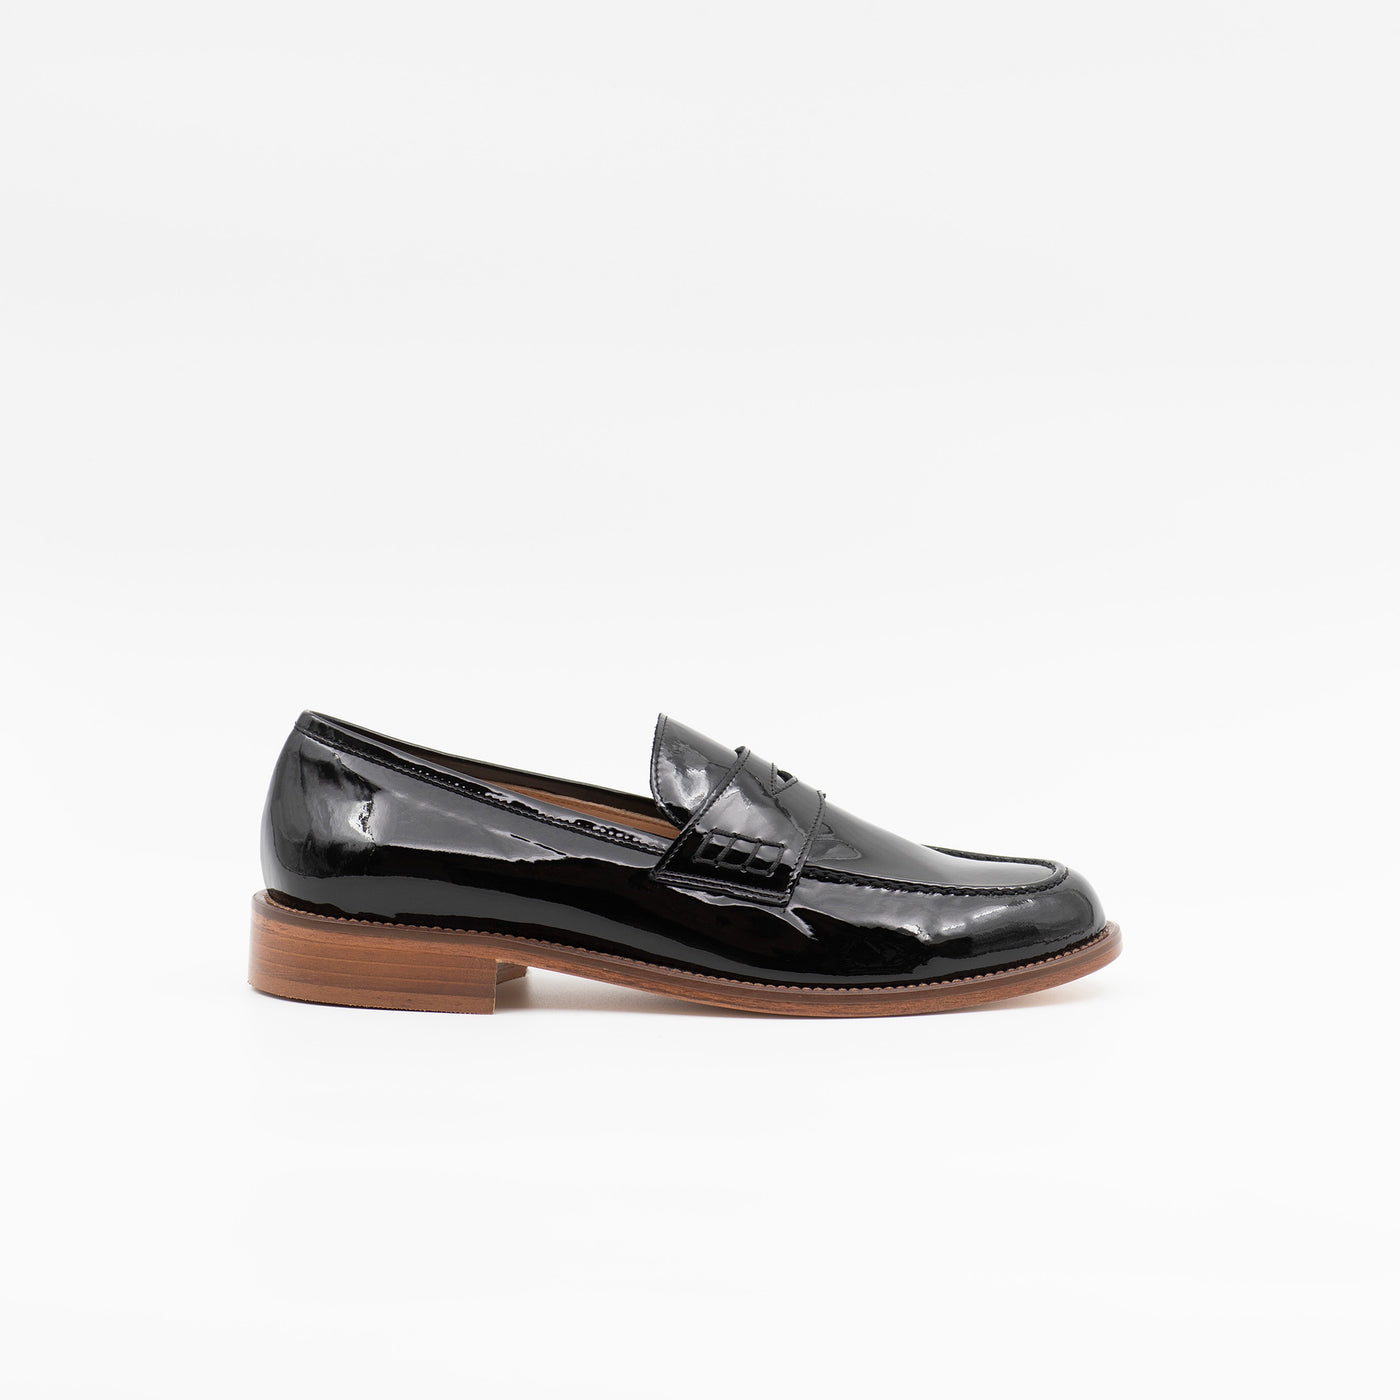 Black patent loafer with brown sole